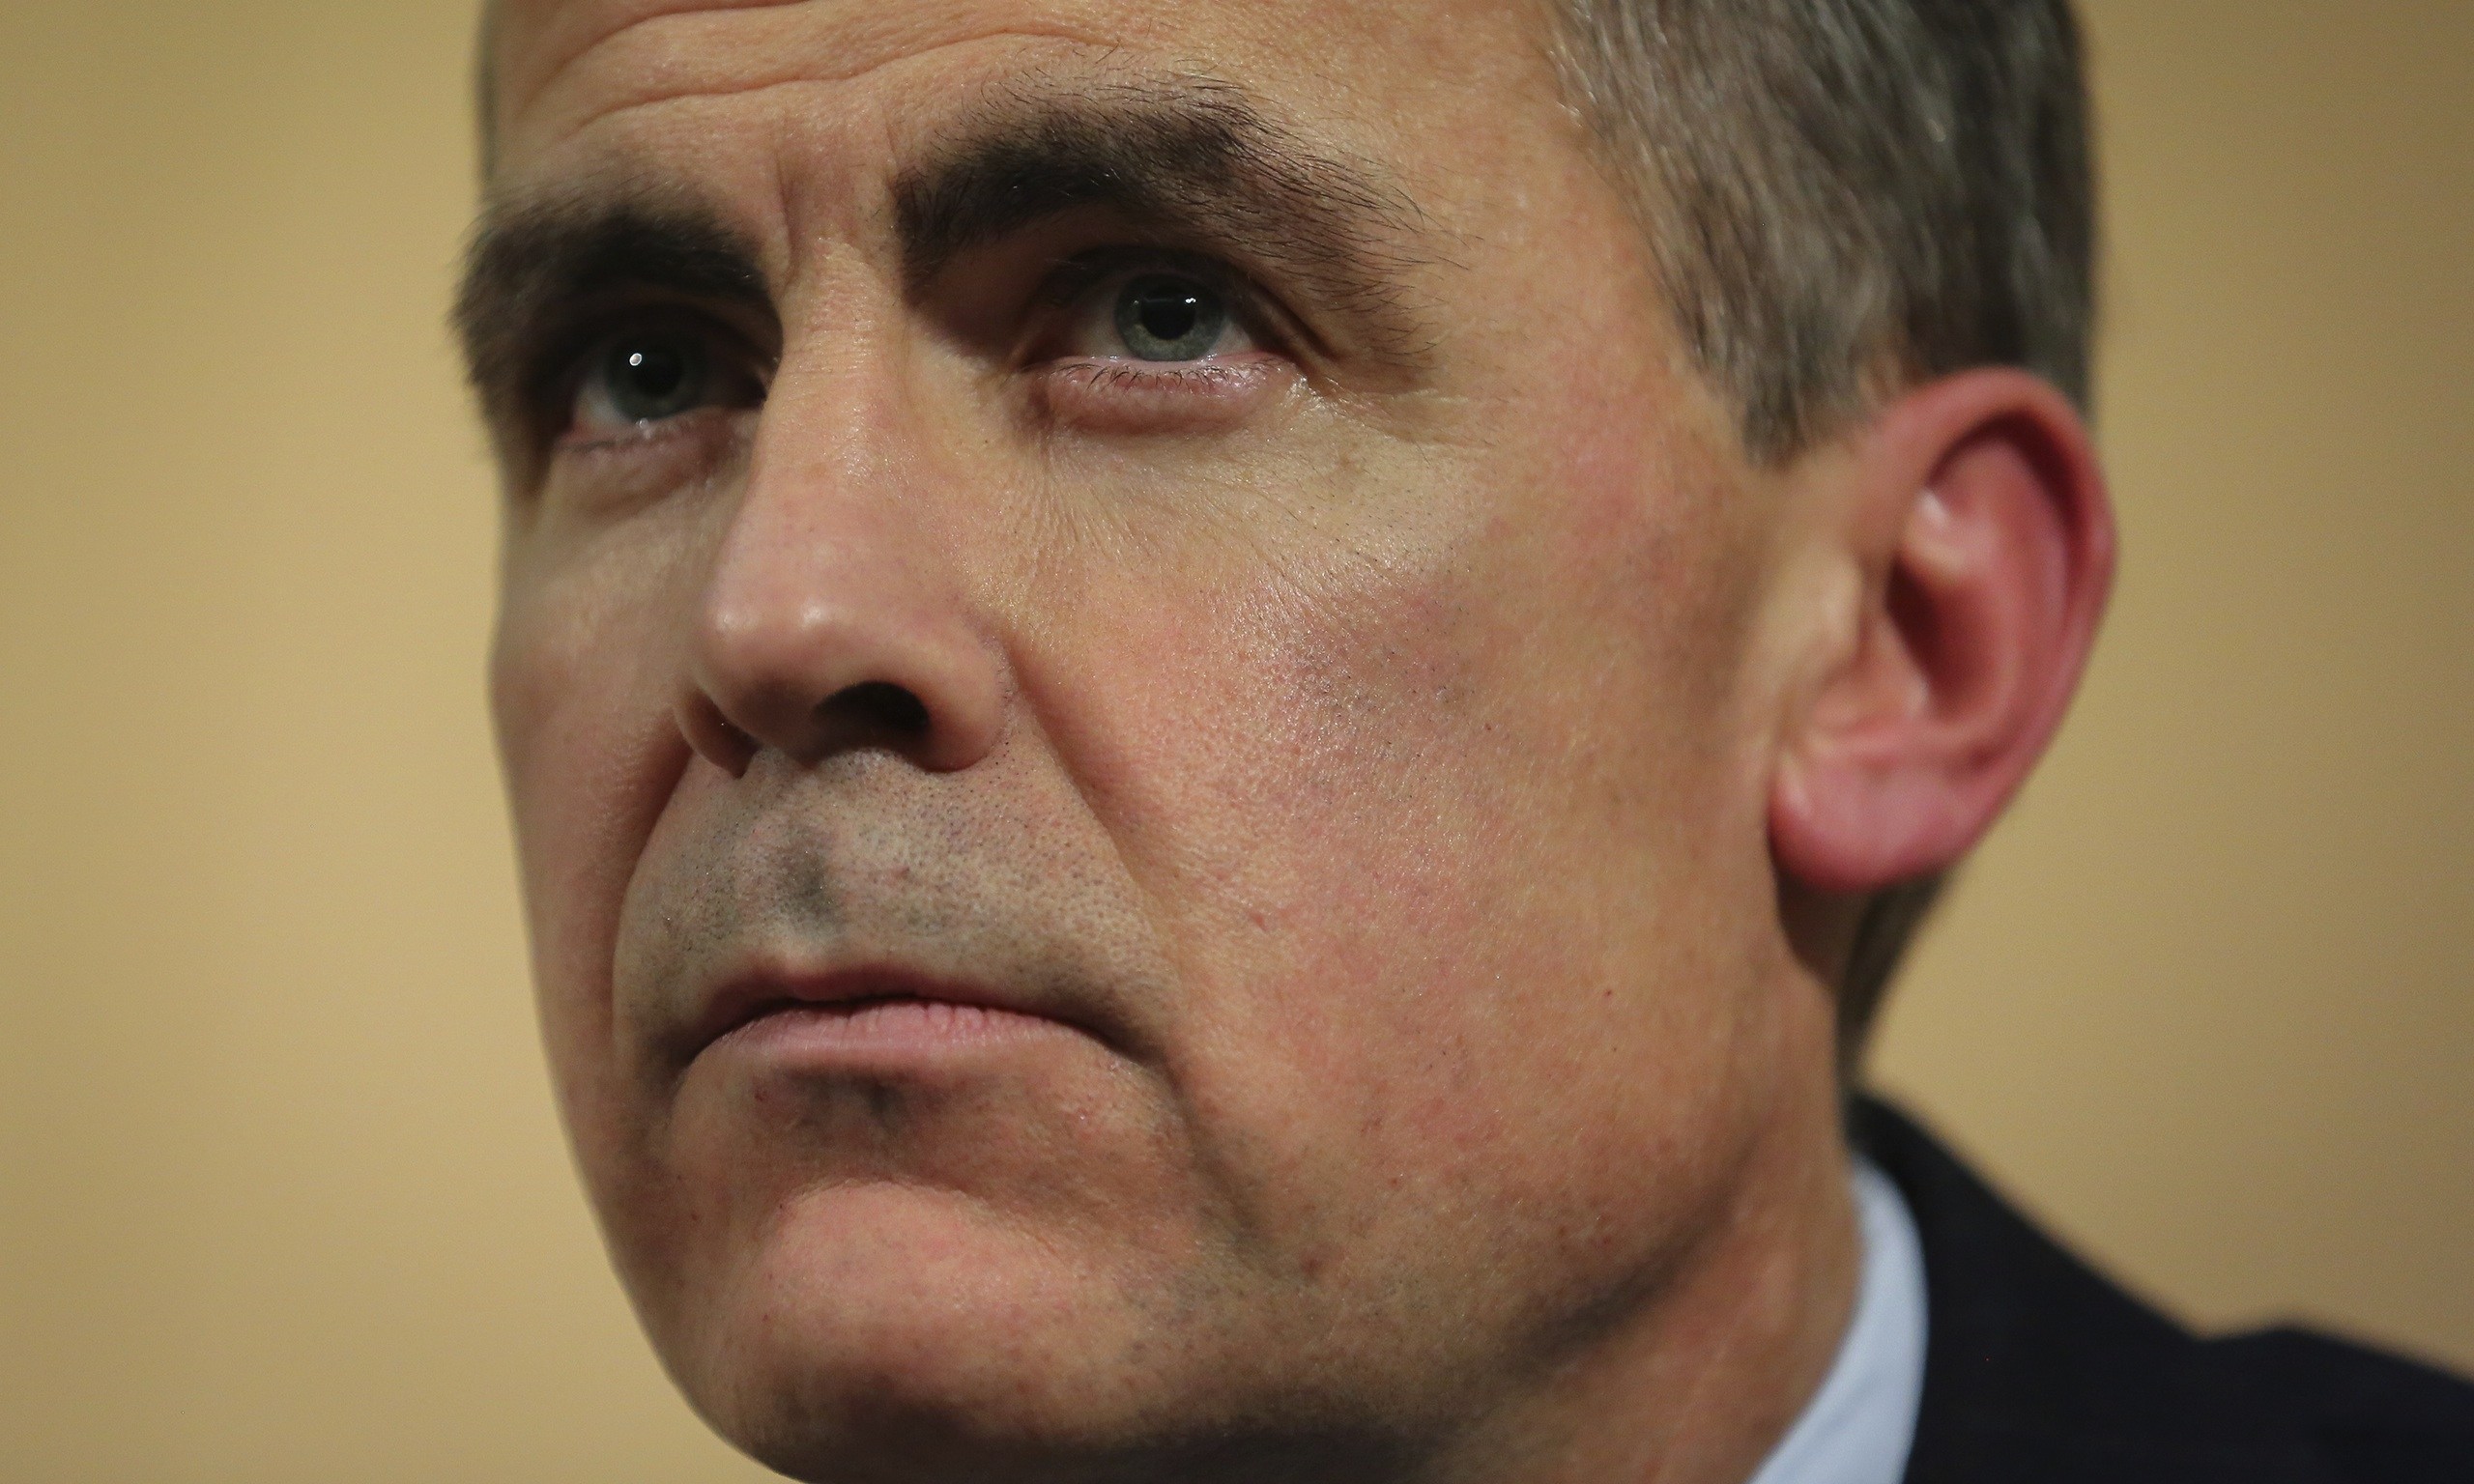 http://static.guim.co.uk/sys-images/Guardian/About/General/2013/11/10/1384097184142/Mark-Carney-014.jpg